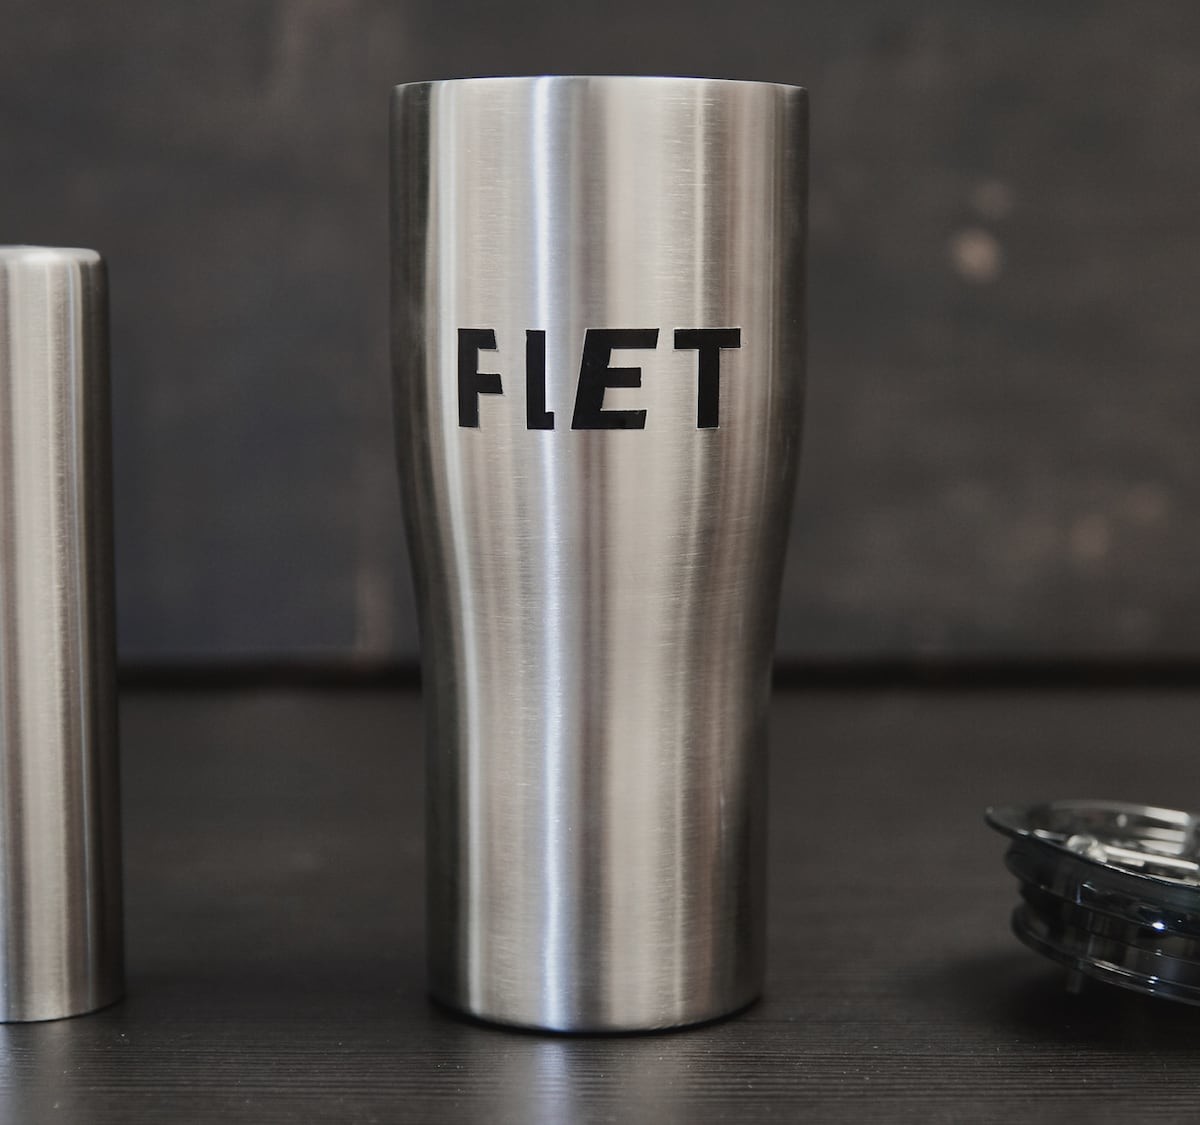 FLET Iced Drink Tumbler has a frozen stick inside to keep your beverage super cold